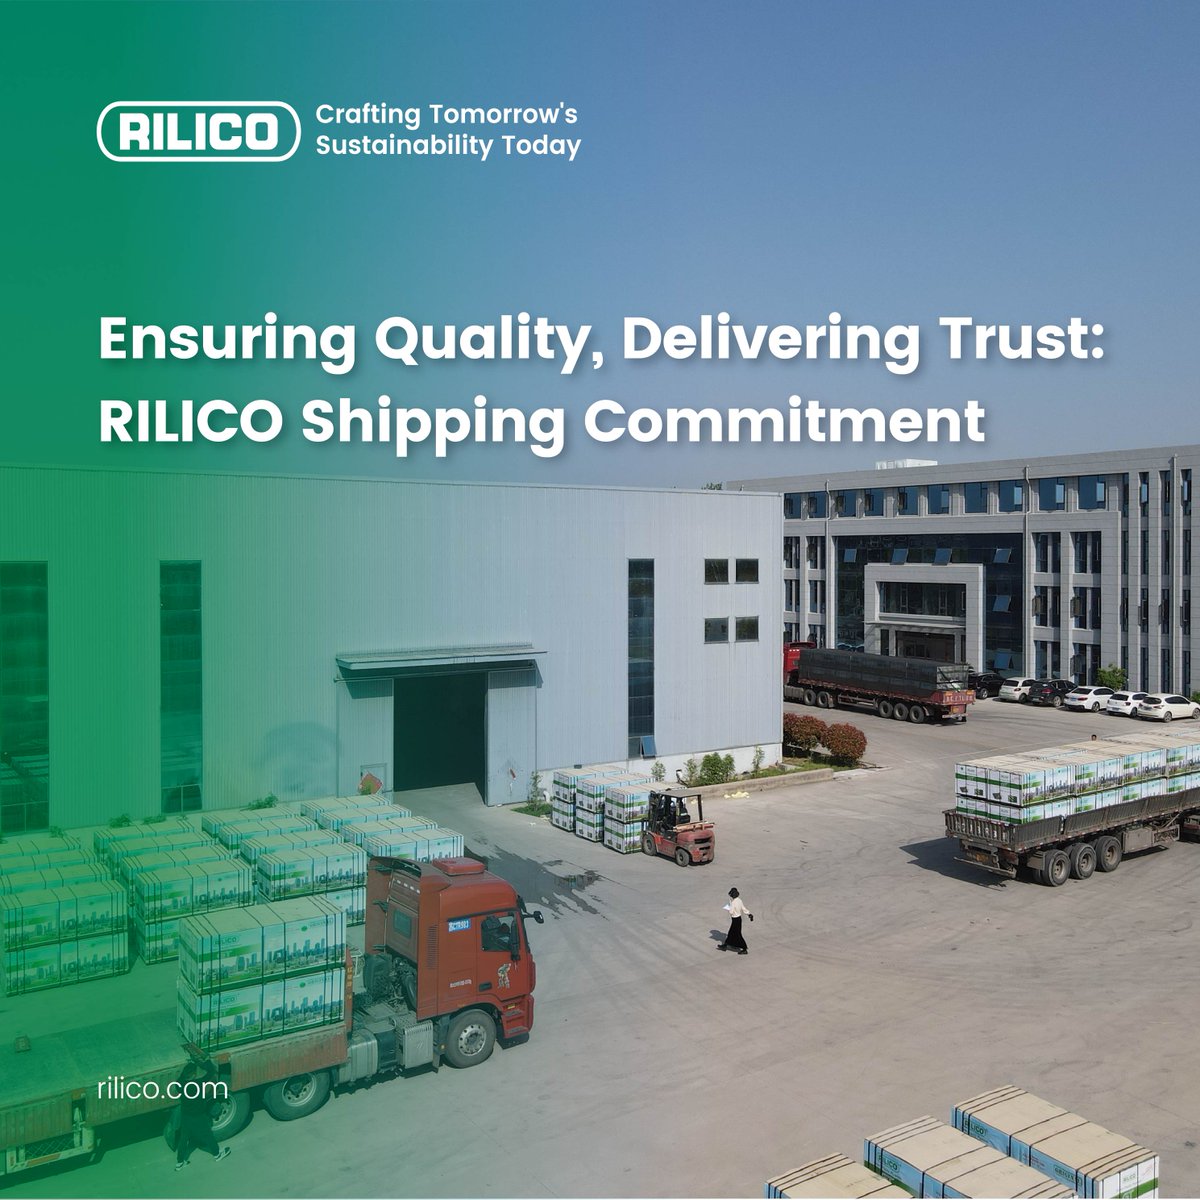 📦 Ensuring Quality, Delivering Trust: Our Shipping Commitment 💫📦

Each RILICO shipment reflects our dedication to your trust and quality! 🤝 Your pursuit of construction excellence fuels our growth, and we're more than order fulfillers – we're conveyors of commitment.